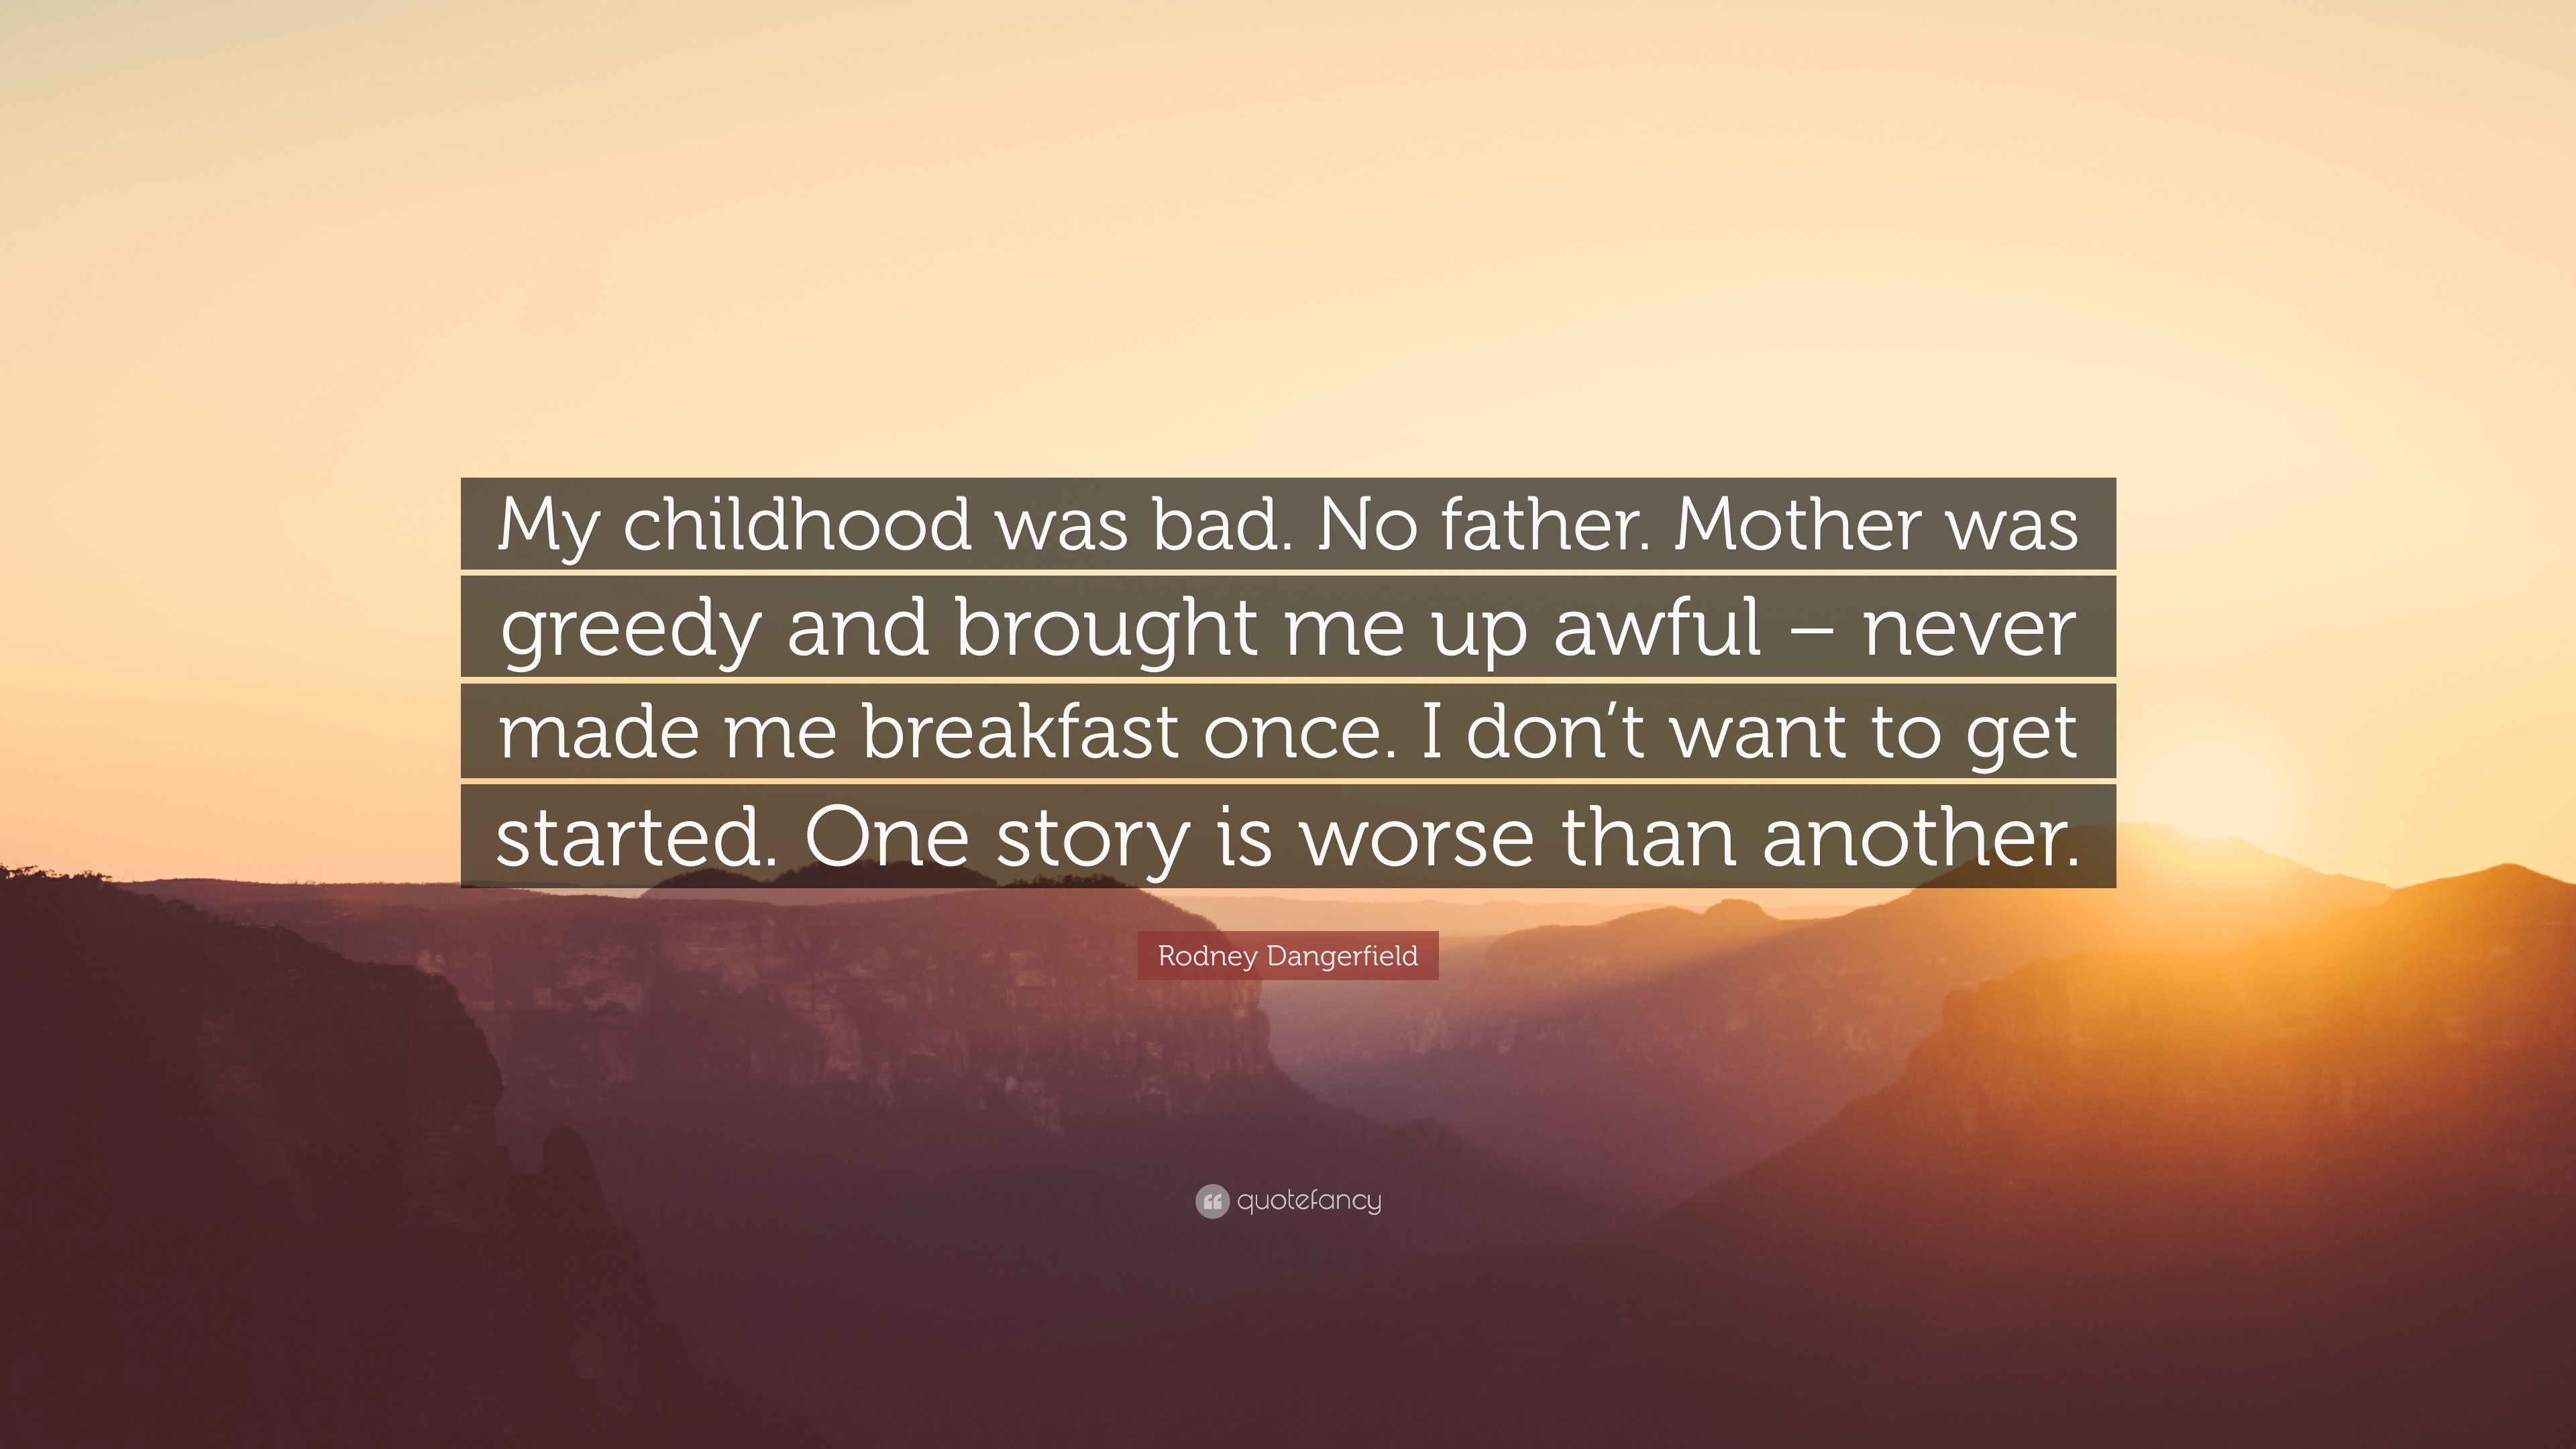 Rodney Dangerfield quote: What a childhood I had, why, when I took